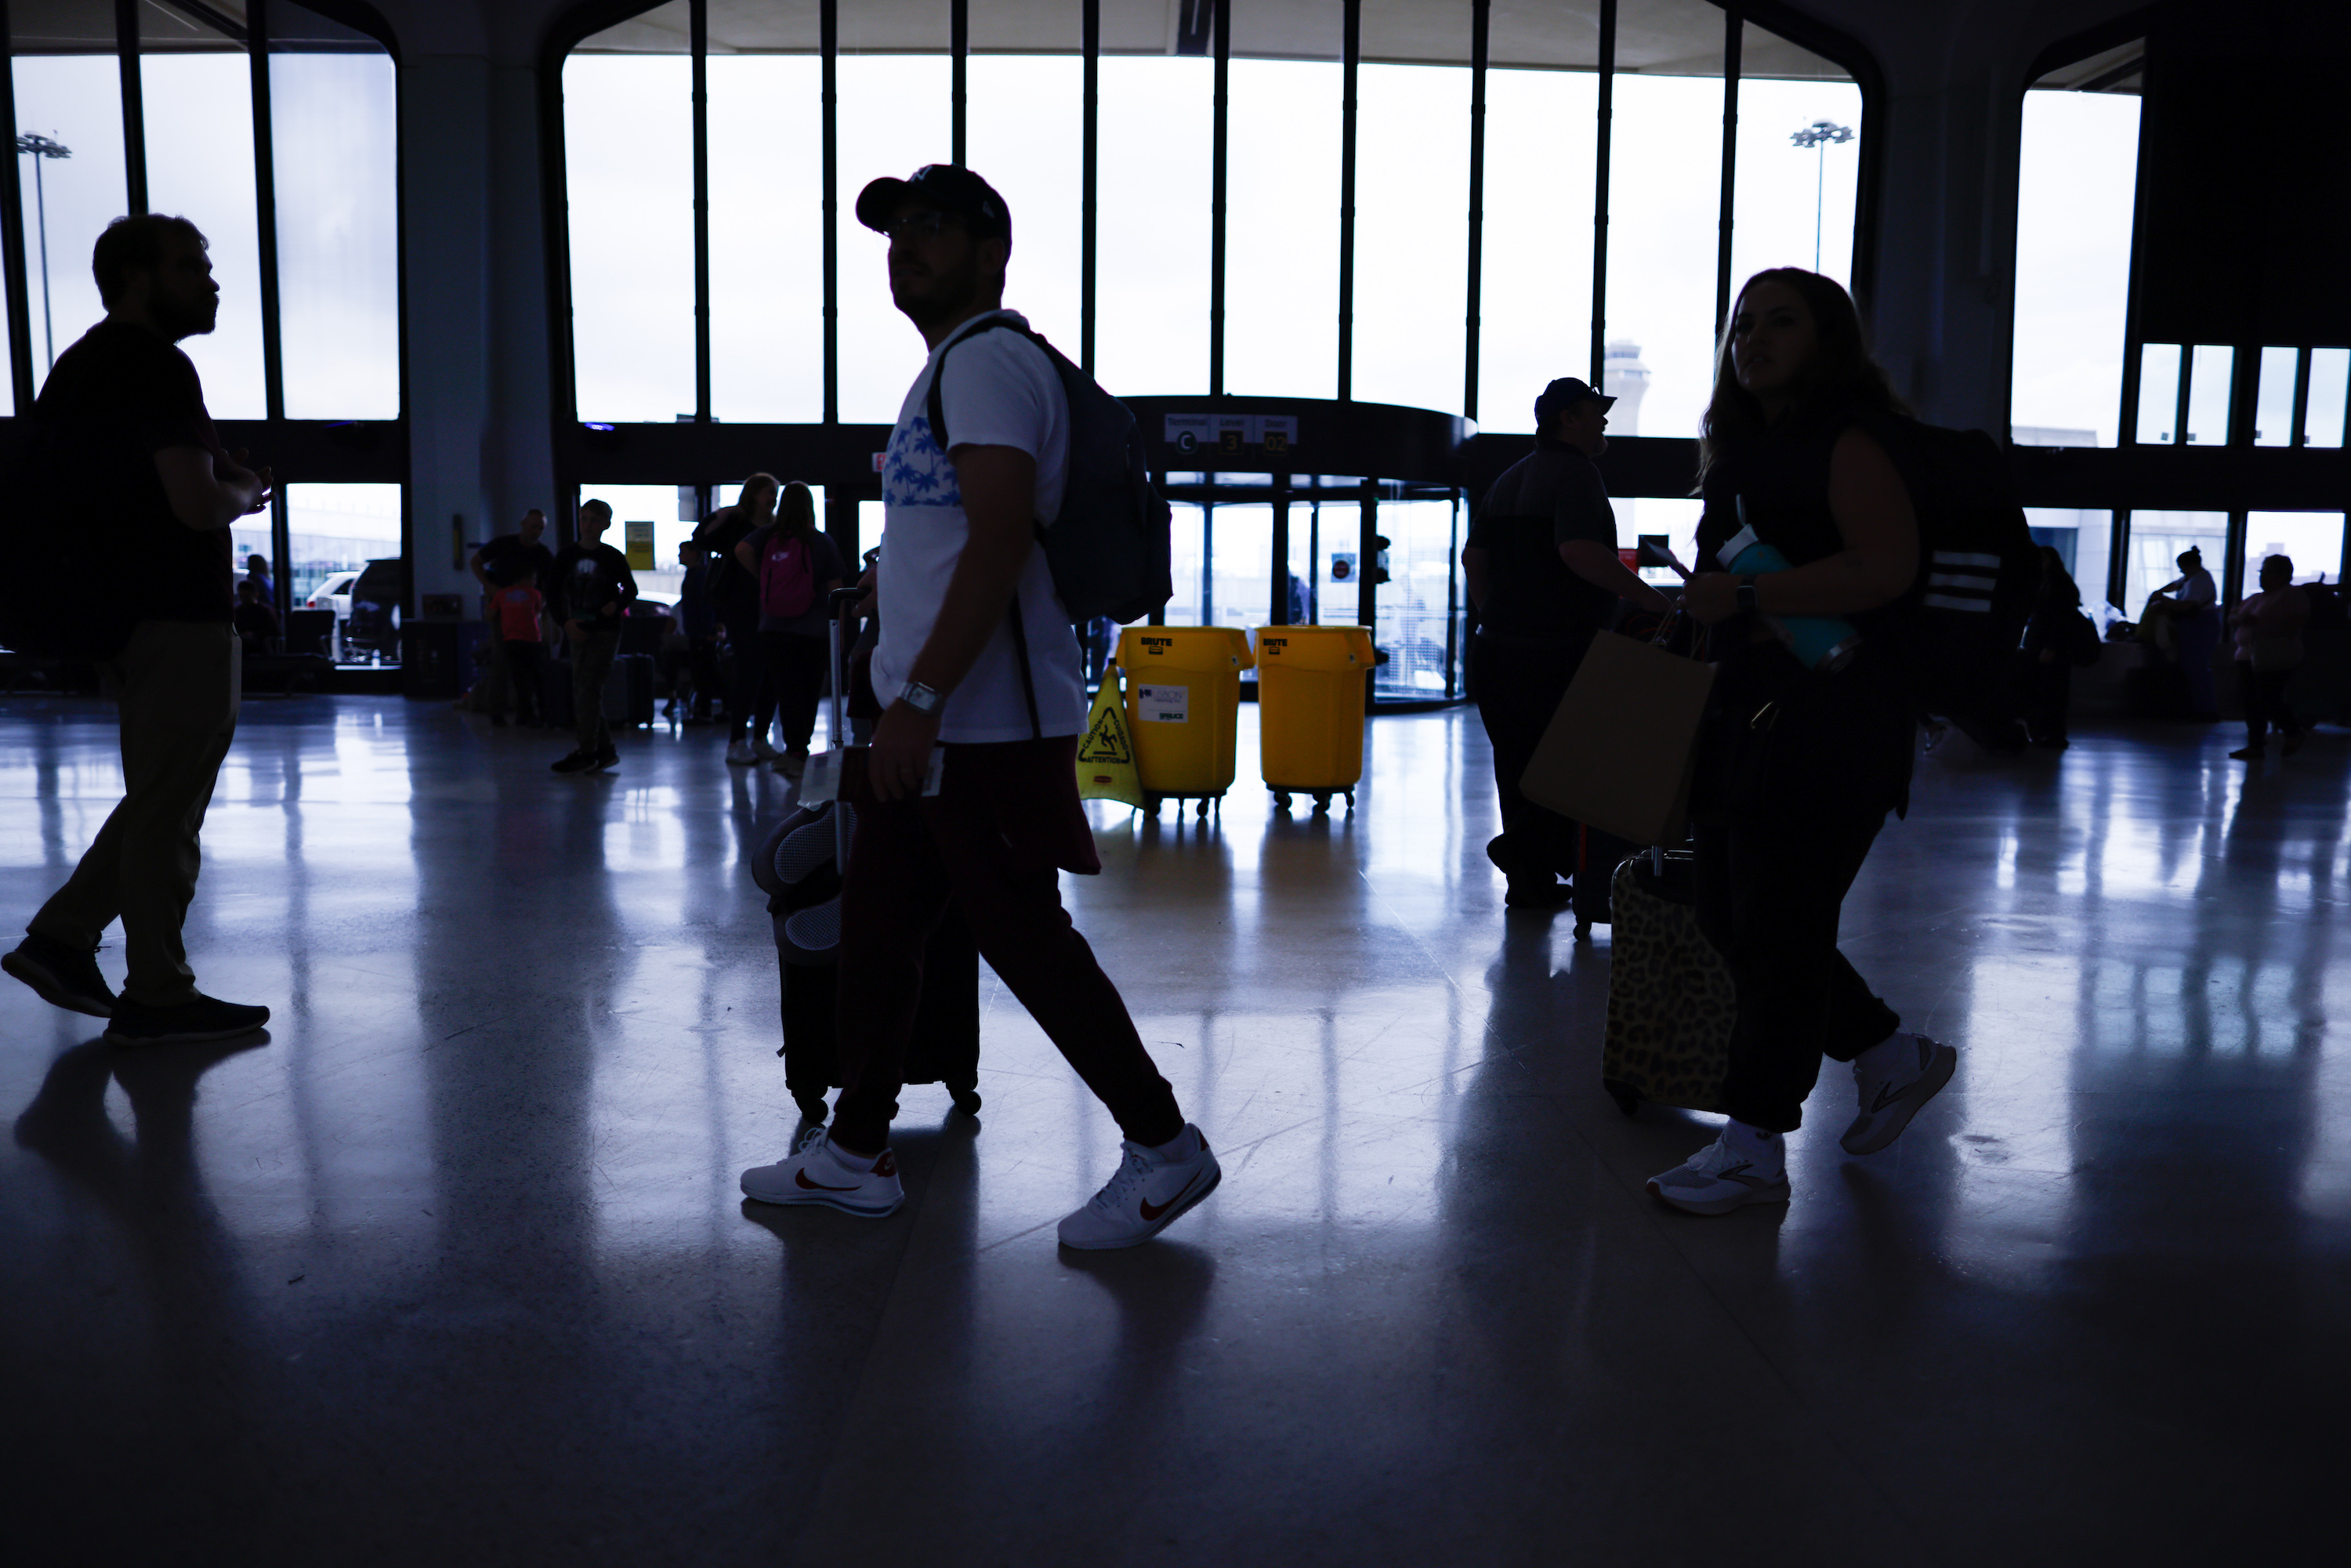 Fixing Air Travel Requires Supporting Airport Service Workers